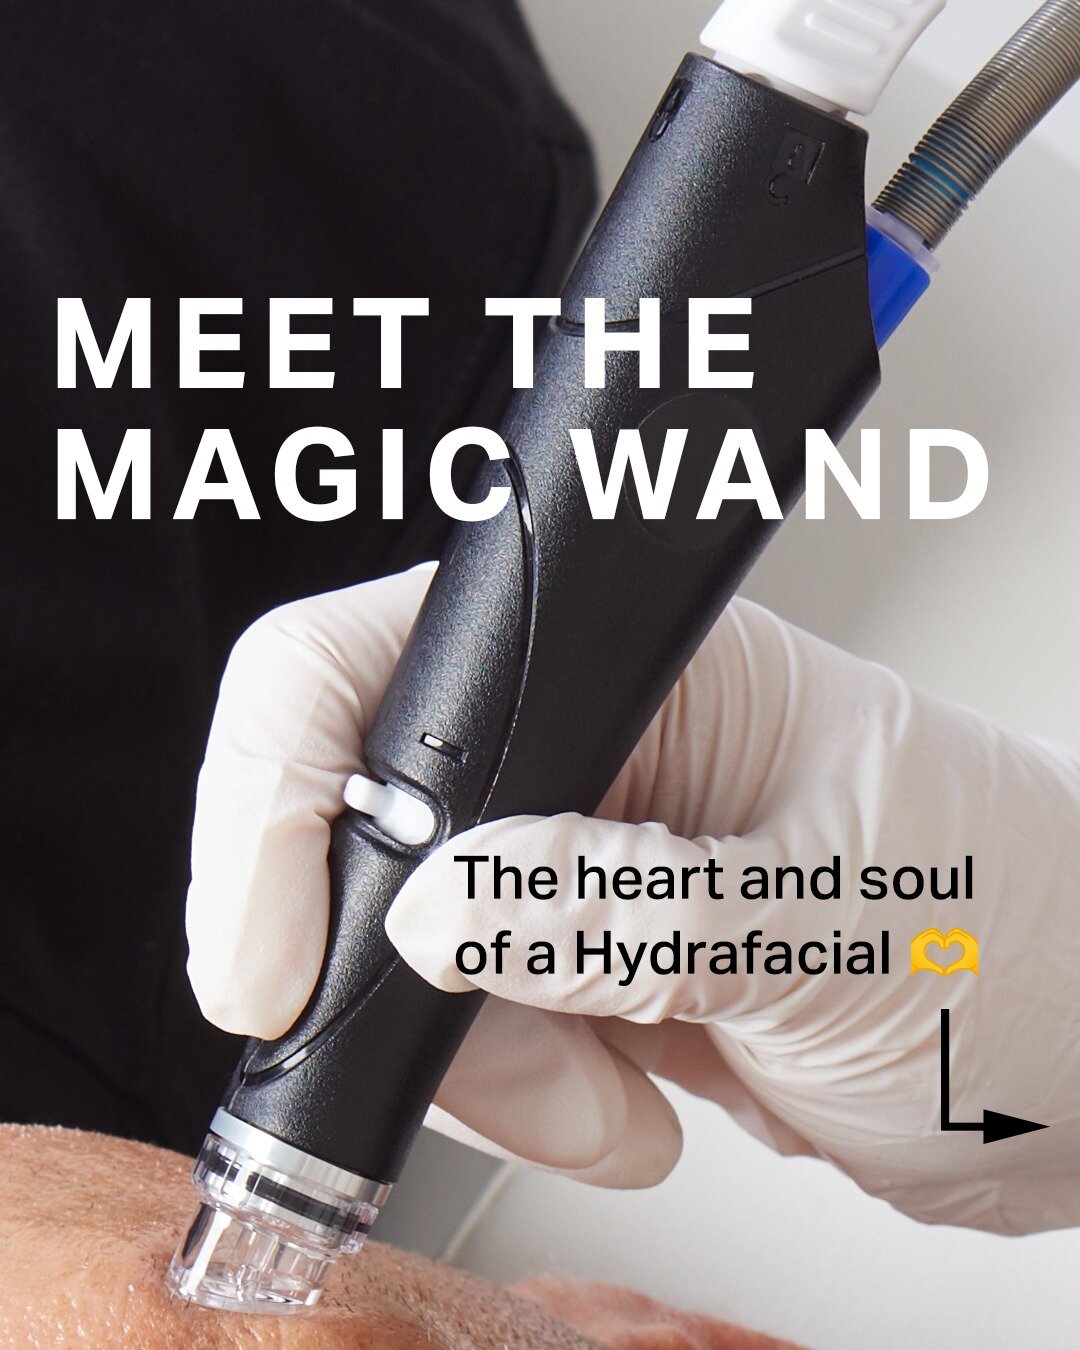 Now is the perfect time to bloom into your bet skin! Explore the possibilities with a Hydrafacial this month and experience the lasting results 🧖🏾&zwj;♀️
.
.
.
The Hydrafacial's magic wand will leave your skin glowing and feeling healthier than eve